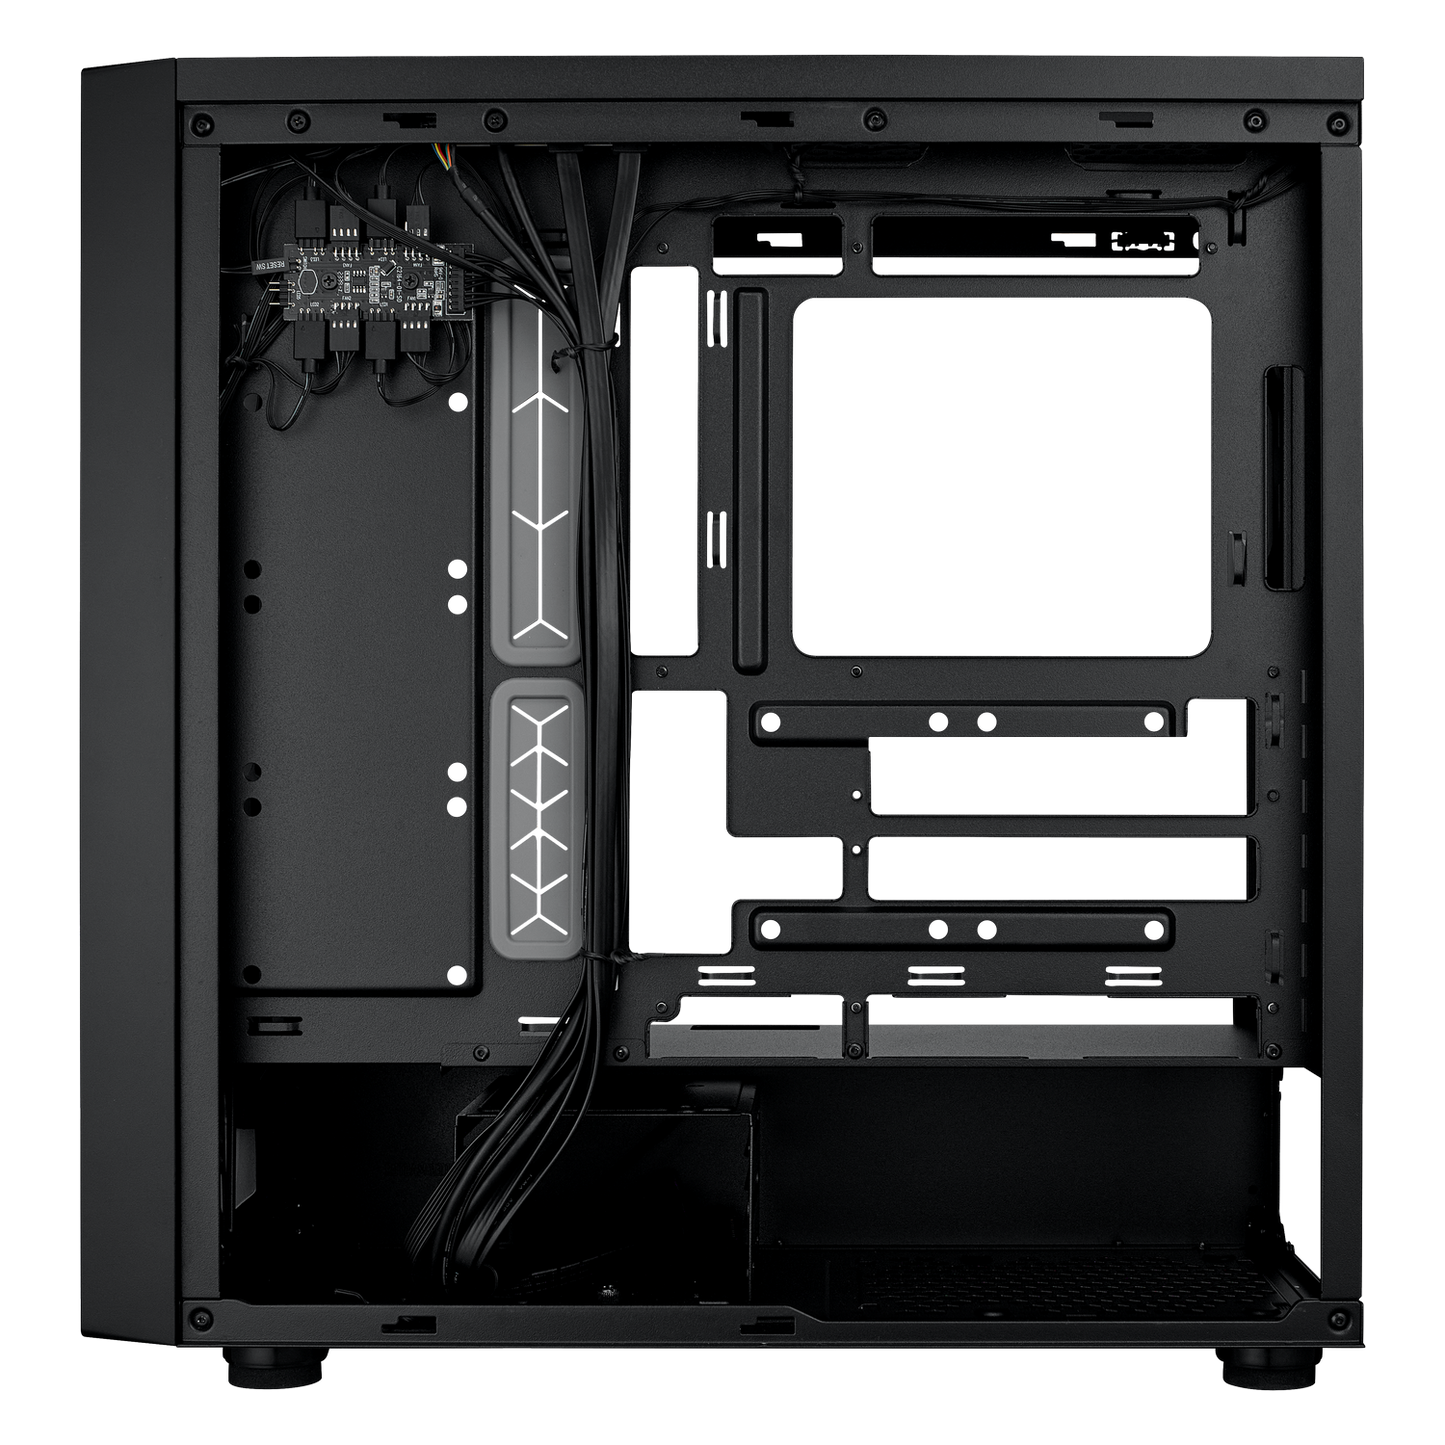 Cooler Master MasterBox 600 - Mid Tower PC Case - Black